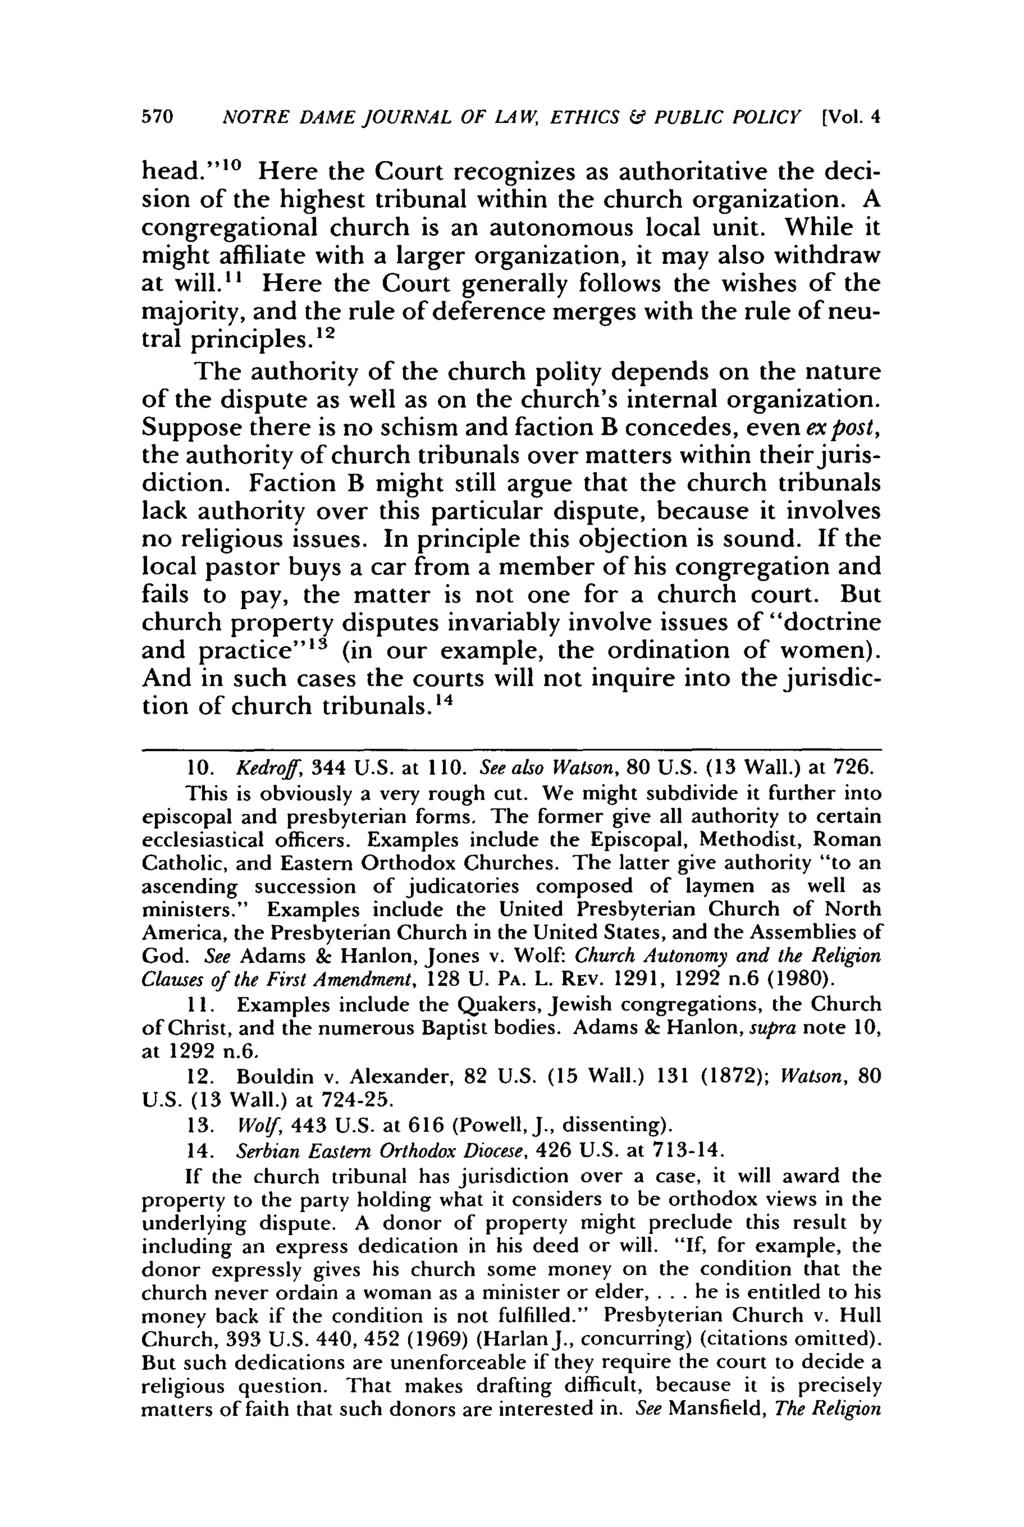 570 NOTRE DAME JOURNAL OF LAW, ETHICS & PUBLIC POLICY [Vol. 4 head."' Here the Court recognizes as authoritative the decision of the highest tribunal within the church organization.